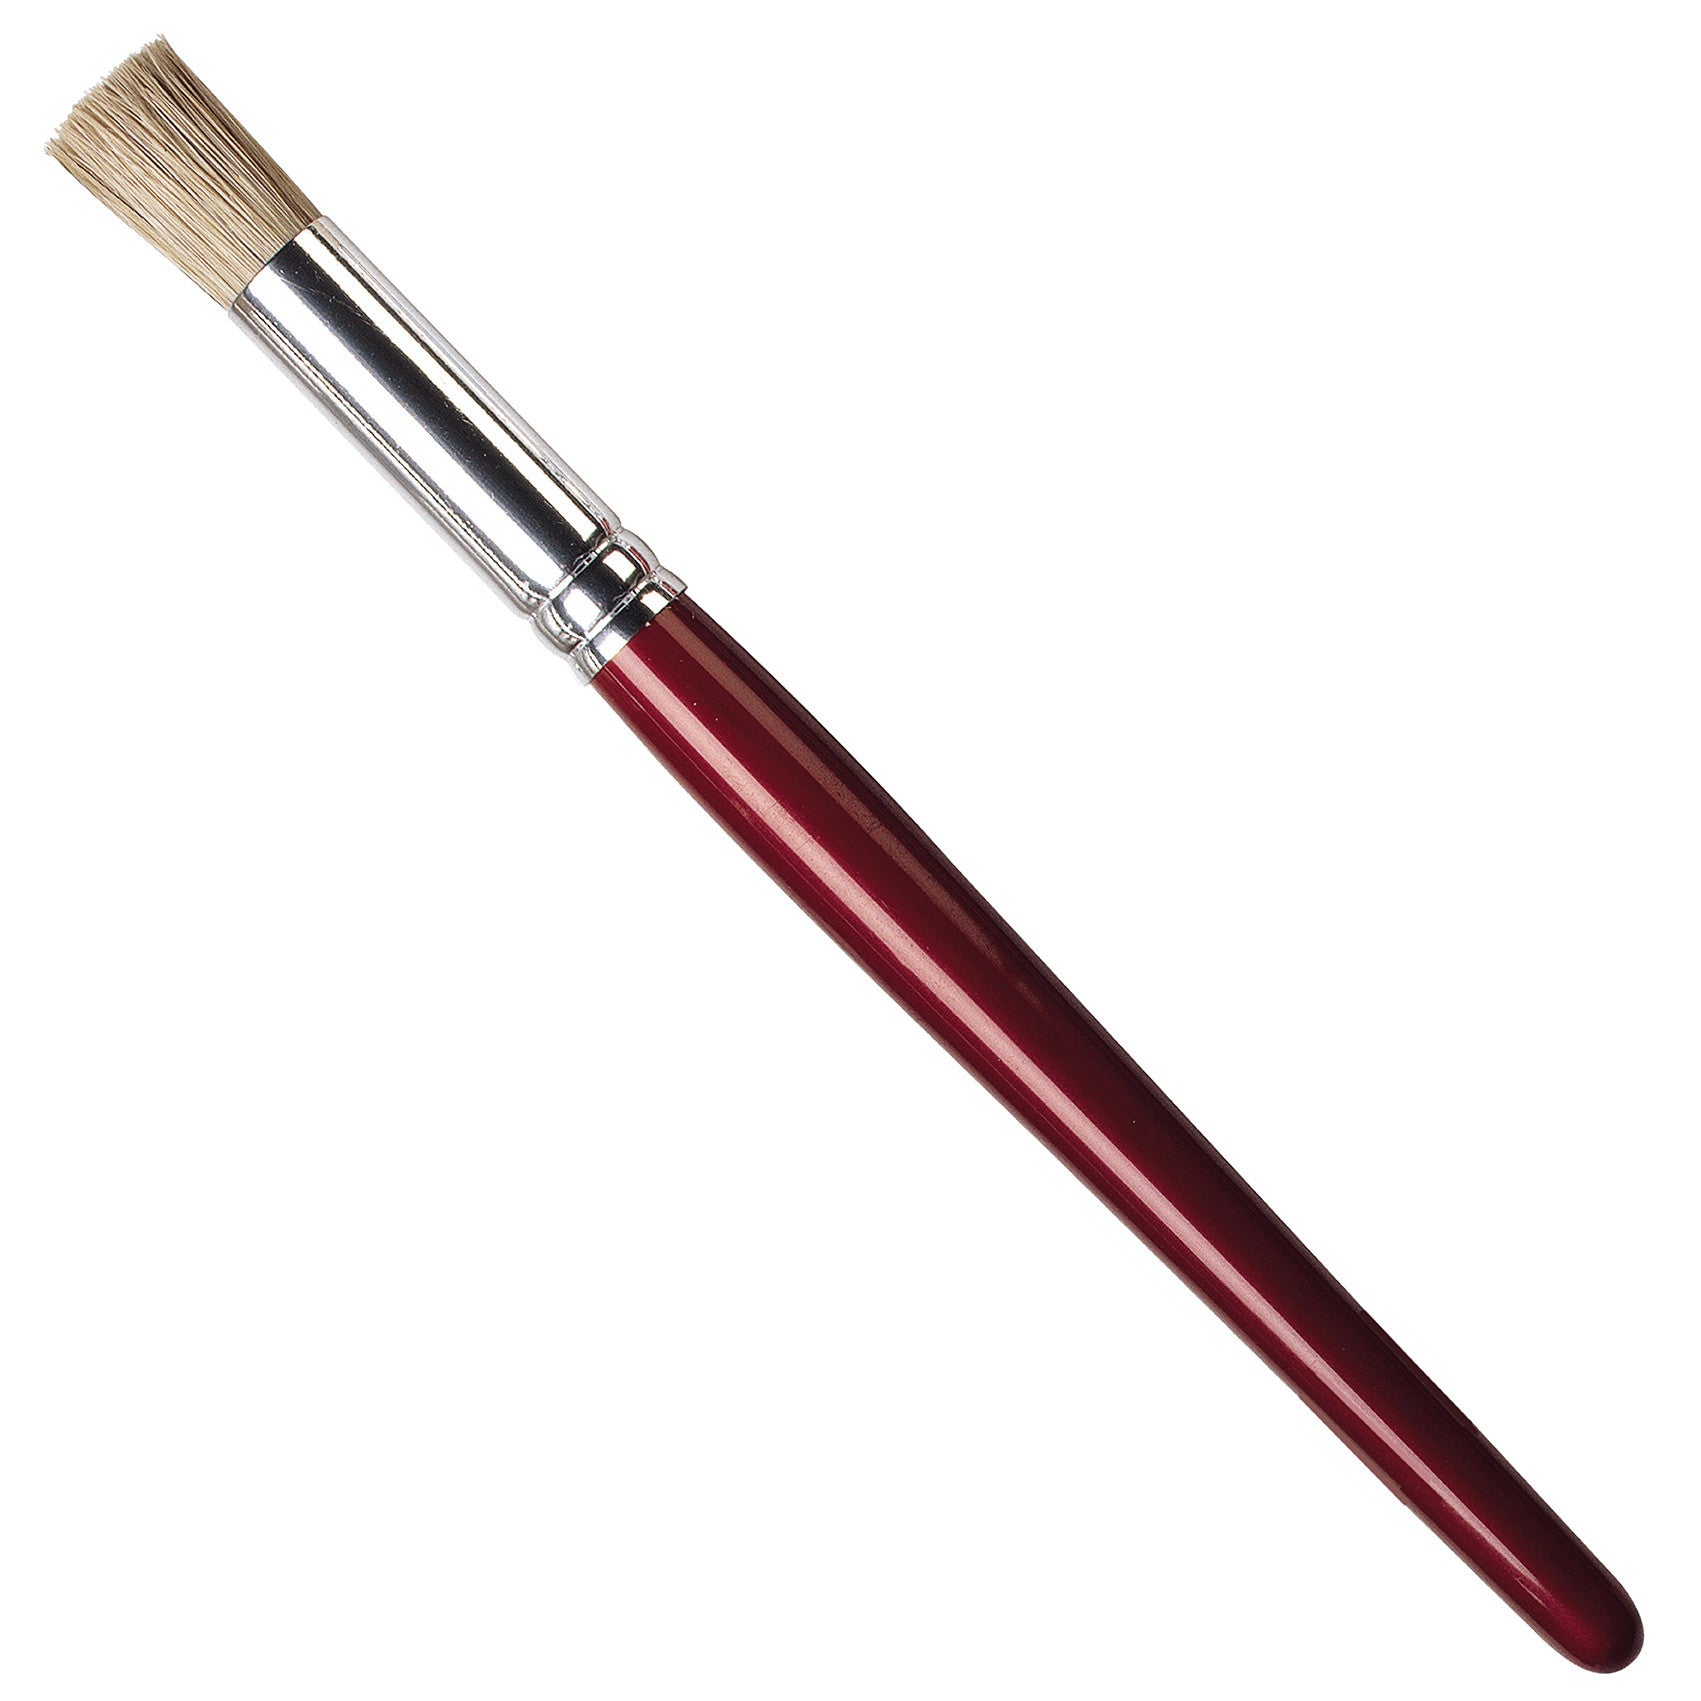 The Pro Arte Series SB Stencil brush is made with fine quality hog hair, ideal for the demanding needs of the stenciller.